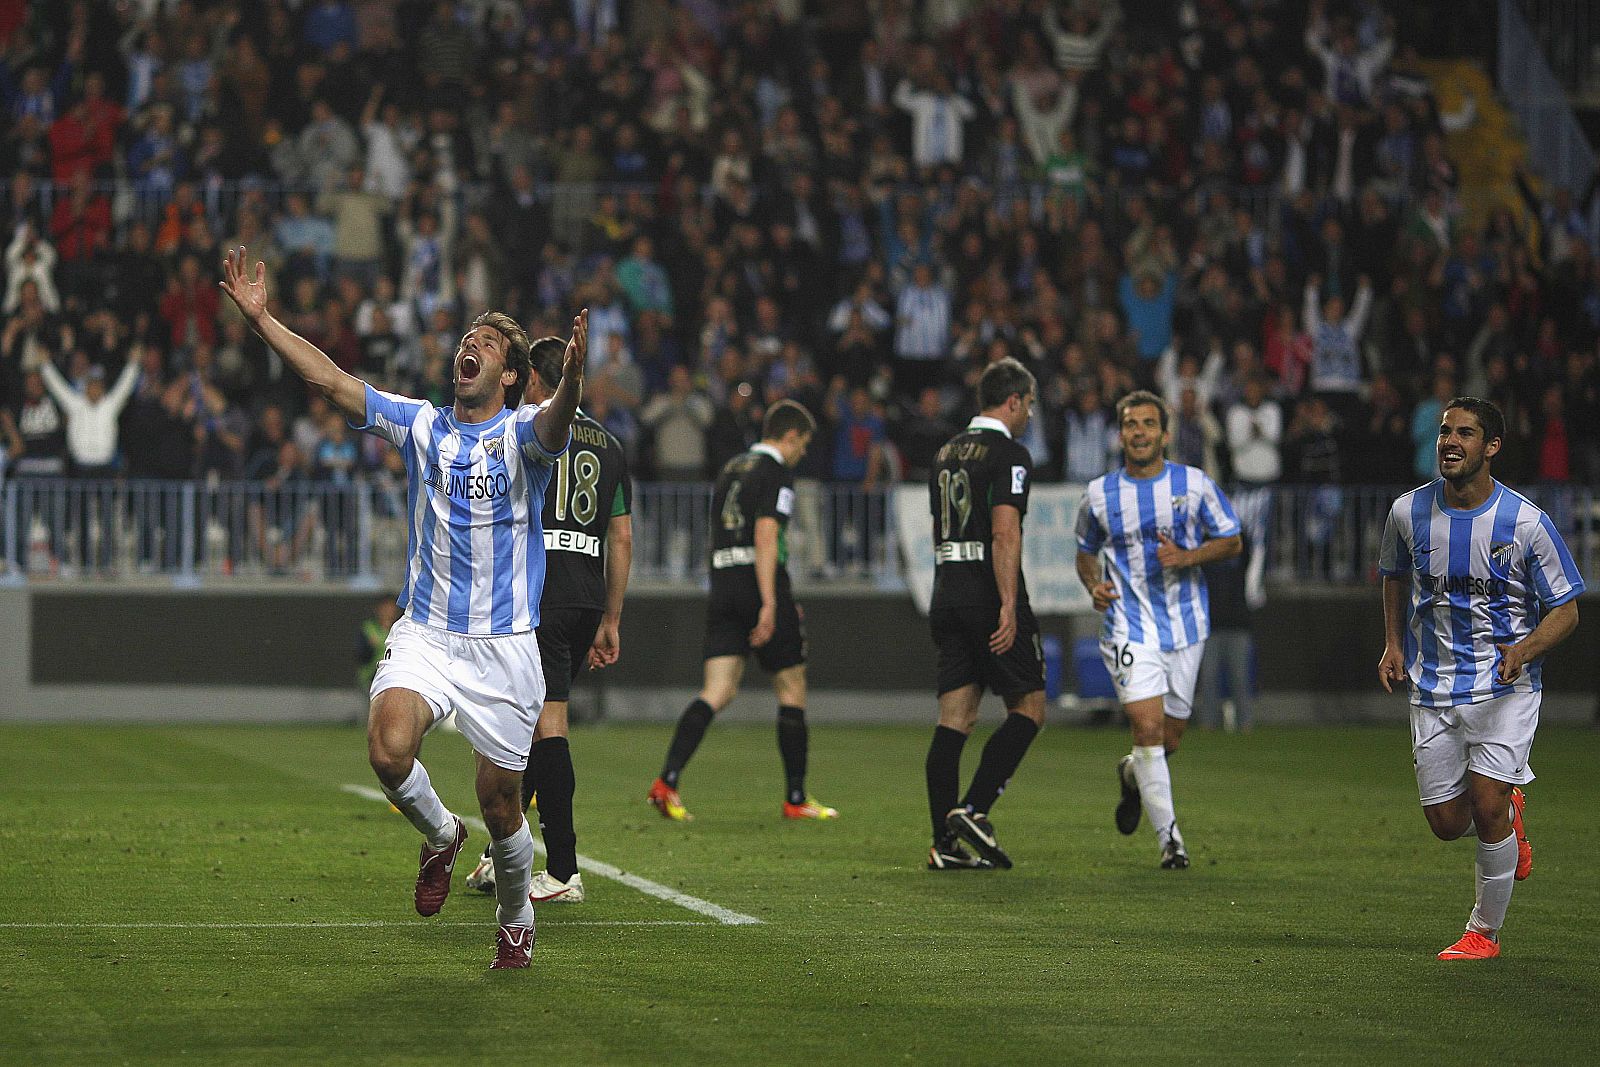 Malaga's Van Nistelrooy celebrates after scoring a goal against Racing Santander during their Spanish First Division soccer match in Malaga